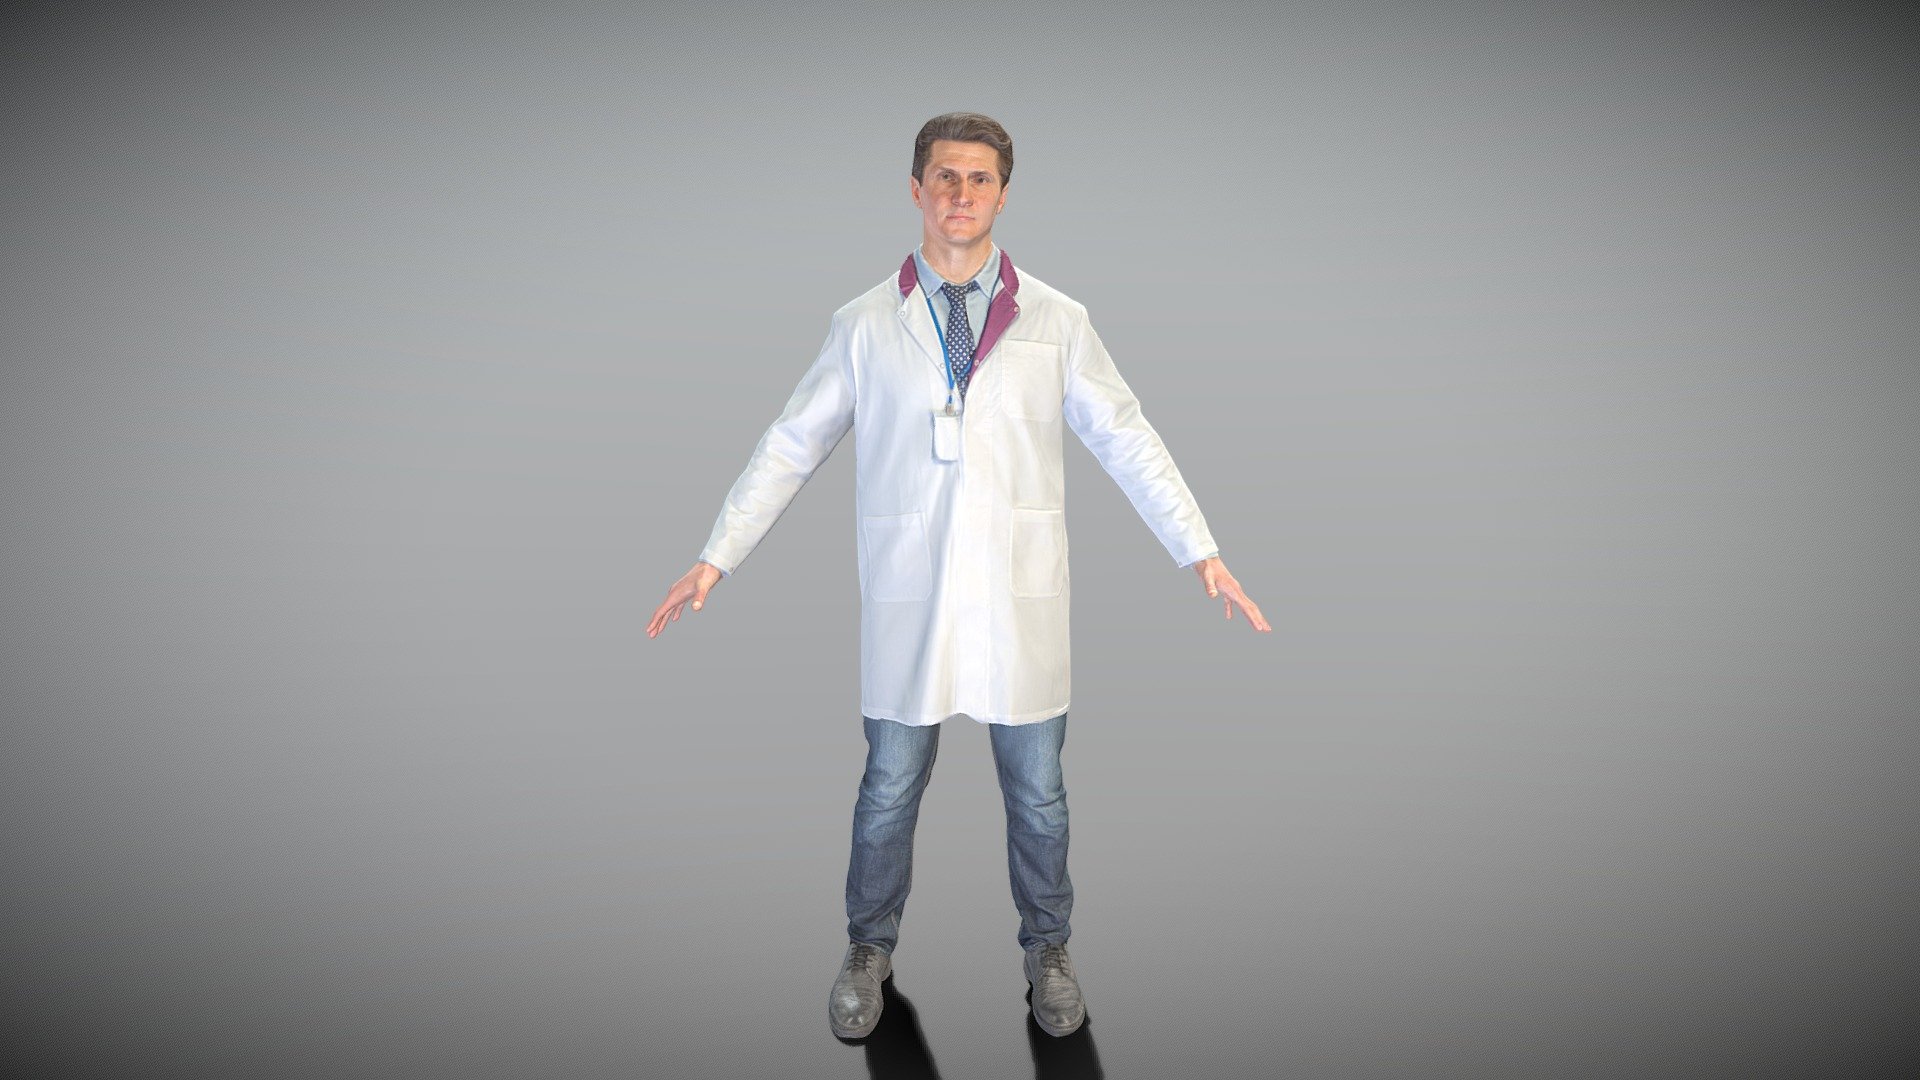 This is a true human size and detailed model of a man of Caucasian appearance dressed in a uniform of a medical doctor. The model is captured in the A-pose with mesh ready for rigging and animation in all most usable 3d software.

Technical specifications:




digital double scan model

low-poly model

high-poly model (.ztl tool with 5-6 subdivisions) clean and retopologized automatically via ZRemesher

fully quad topology

sufficiently clean

edge Loops based

ready for subdivision

8K texture color map

non-overlapping UV map

ready for animation

PBR textures 8K resolution: Normal, Displacement, Albedo maps

Download package includes a Cinema 4D project file with Redshift shader, OBJ, FBX, STL files, which are applicable for 3ds Max, Maya, Unreal Engine, Unity, Blender, etc. All the textures you will find in the “Tex” folder, included into the main archive.

3D EVERYTHING

Stand with Ukraine! - Medical doctor in A-pose 429 - Buy Royalty Free 3D model by deep3dstudio 3d model